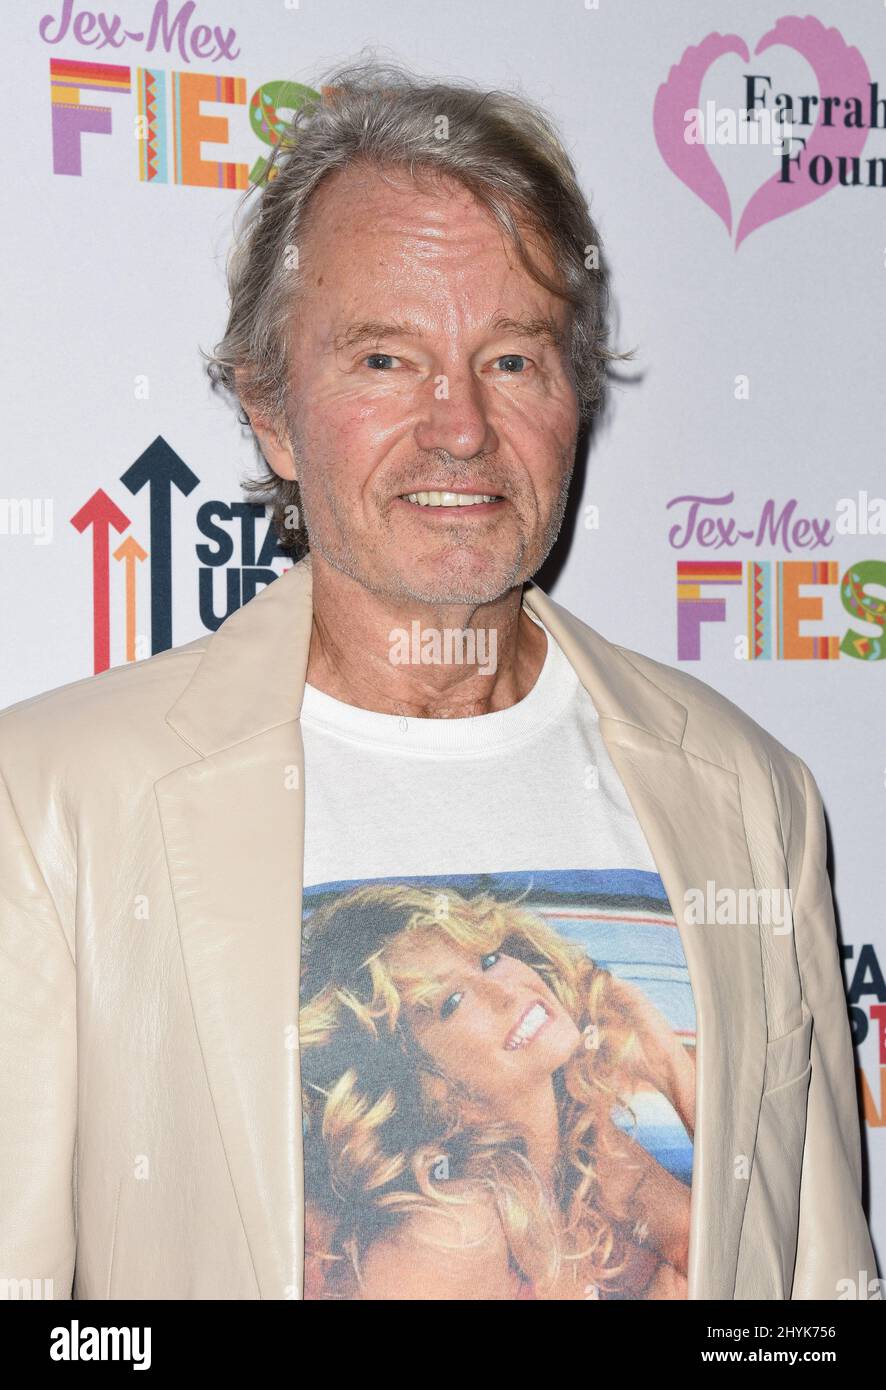 John Savage at The Farrah Fawcett Foundation's Tex-Mex Fiesta held at the Wallis Annenberg Center for the Performing Arts on September 6, 2019 in Beverly Hills, USA. Stock Photo